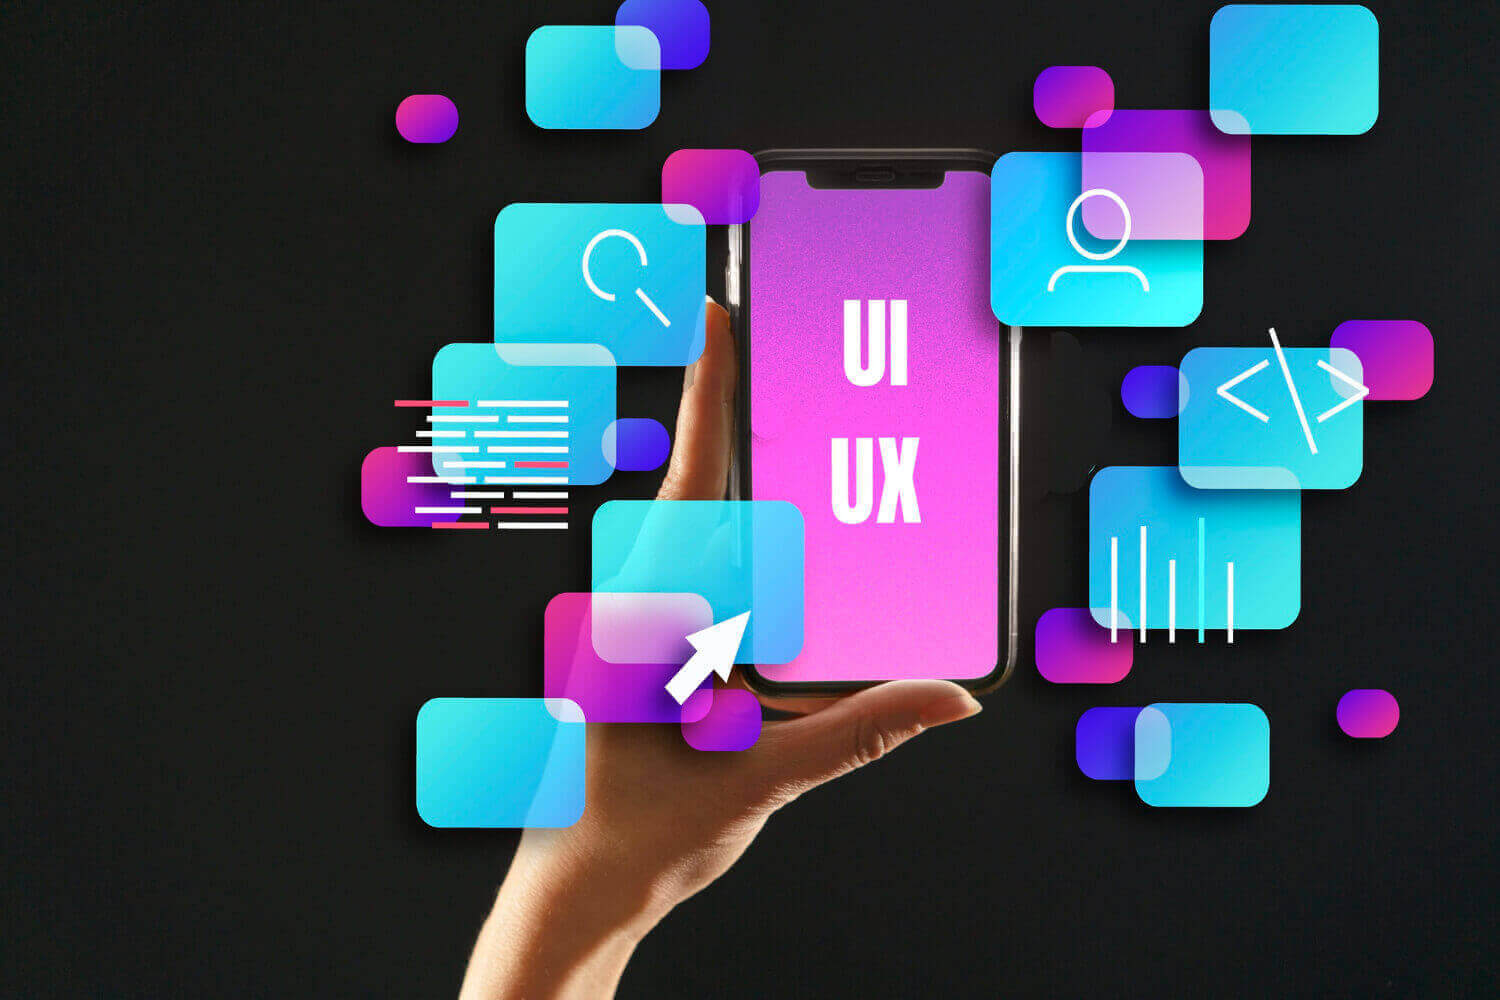 UX in Software Development: Things You Need to Know